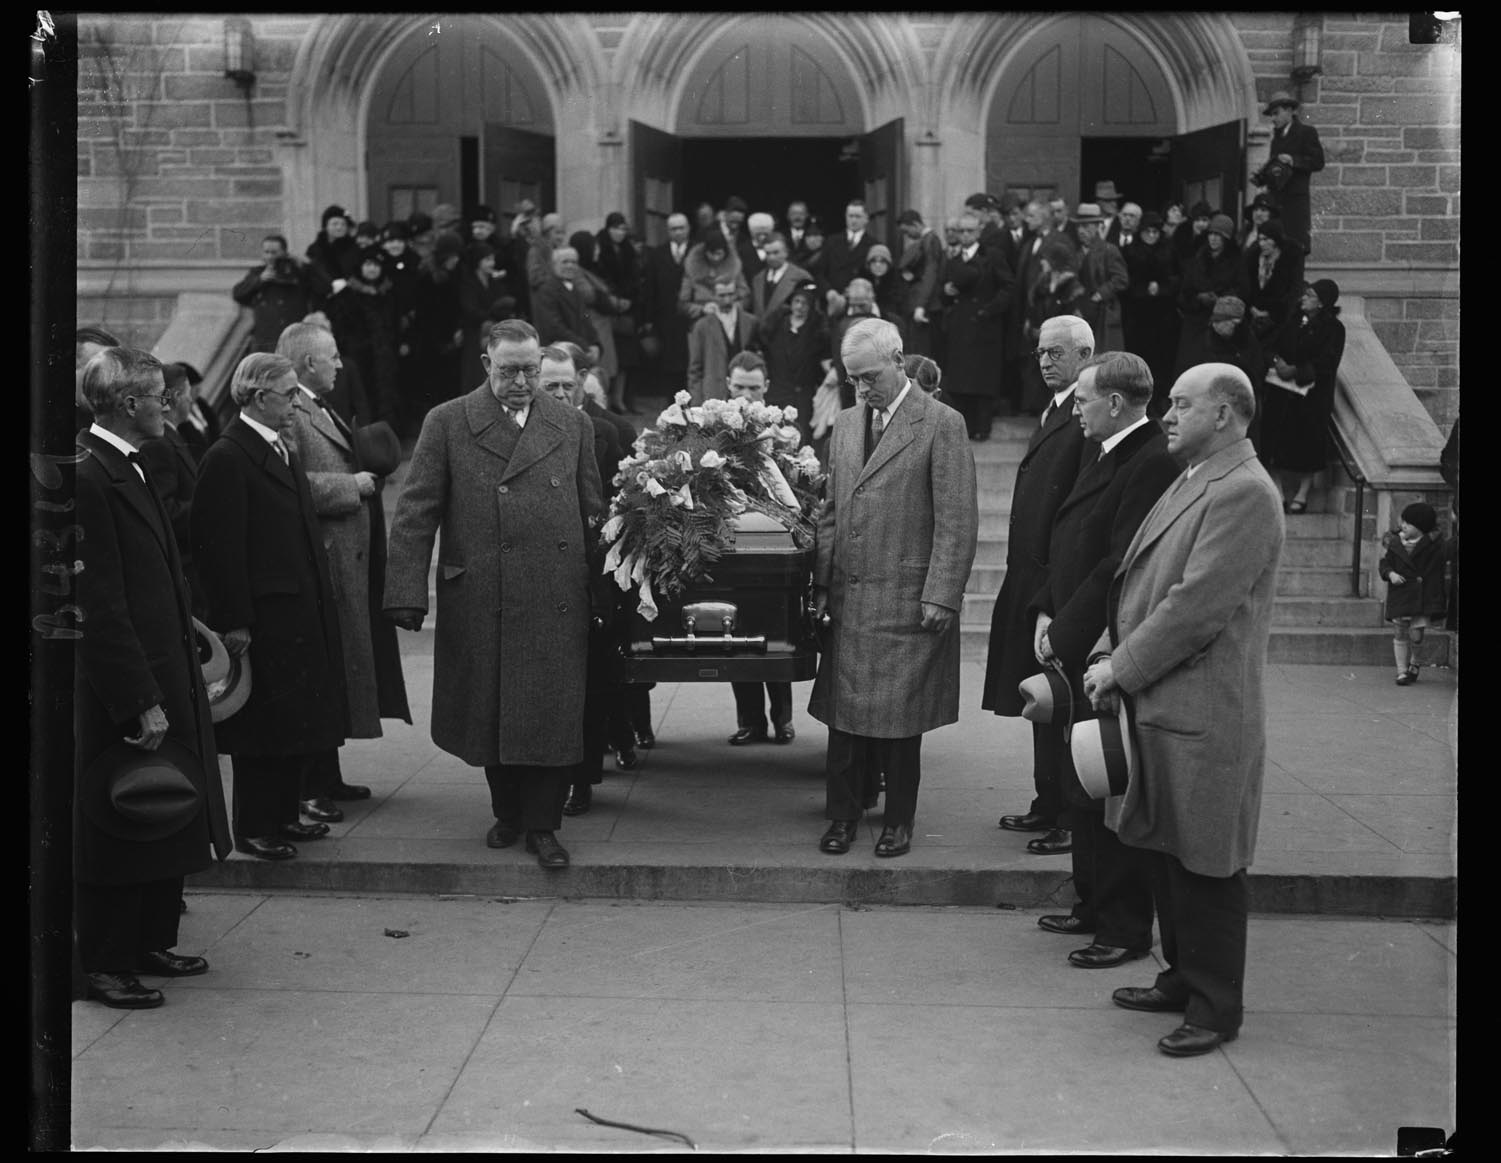 Men, high in the ranks of labor  circles, take part in the last rites for Mother Jones. At right, William N. Doak, newly  appointed Secretary of Labor. The casket is being borne from St. Gabriel's Catholic Church in Washington, D.C., where services were held, after which the body was sent to Mount Olivet, Illinois,  to be buried beside  five of her “boys" slain  in one of the many  labor wars in which  she participated,  December 3, 1930.